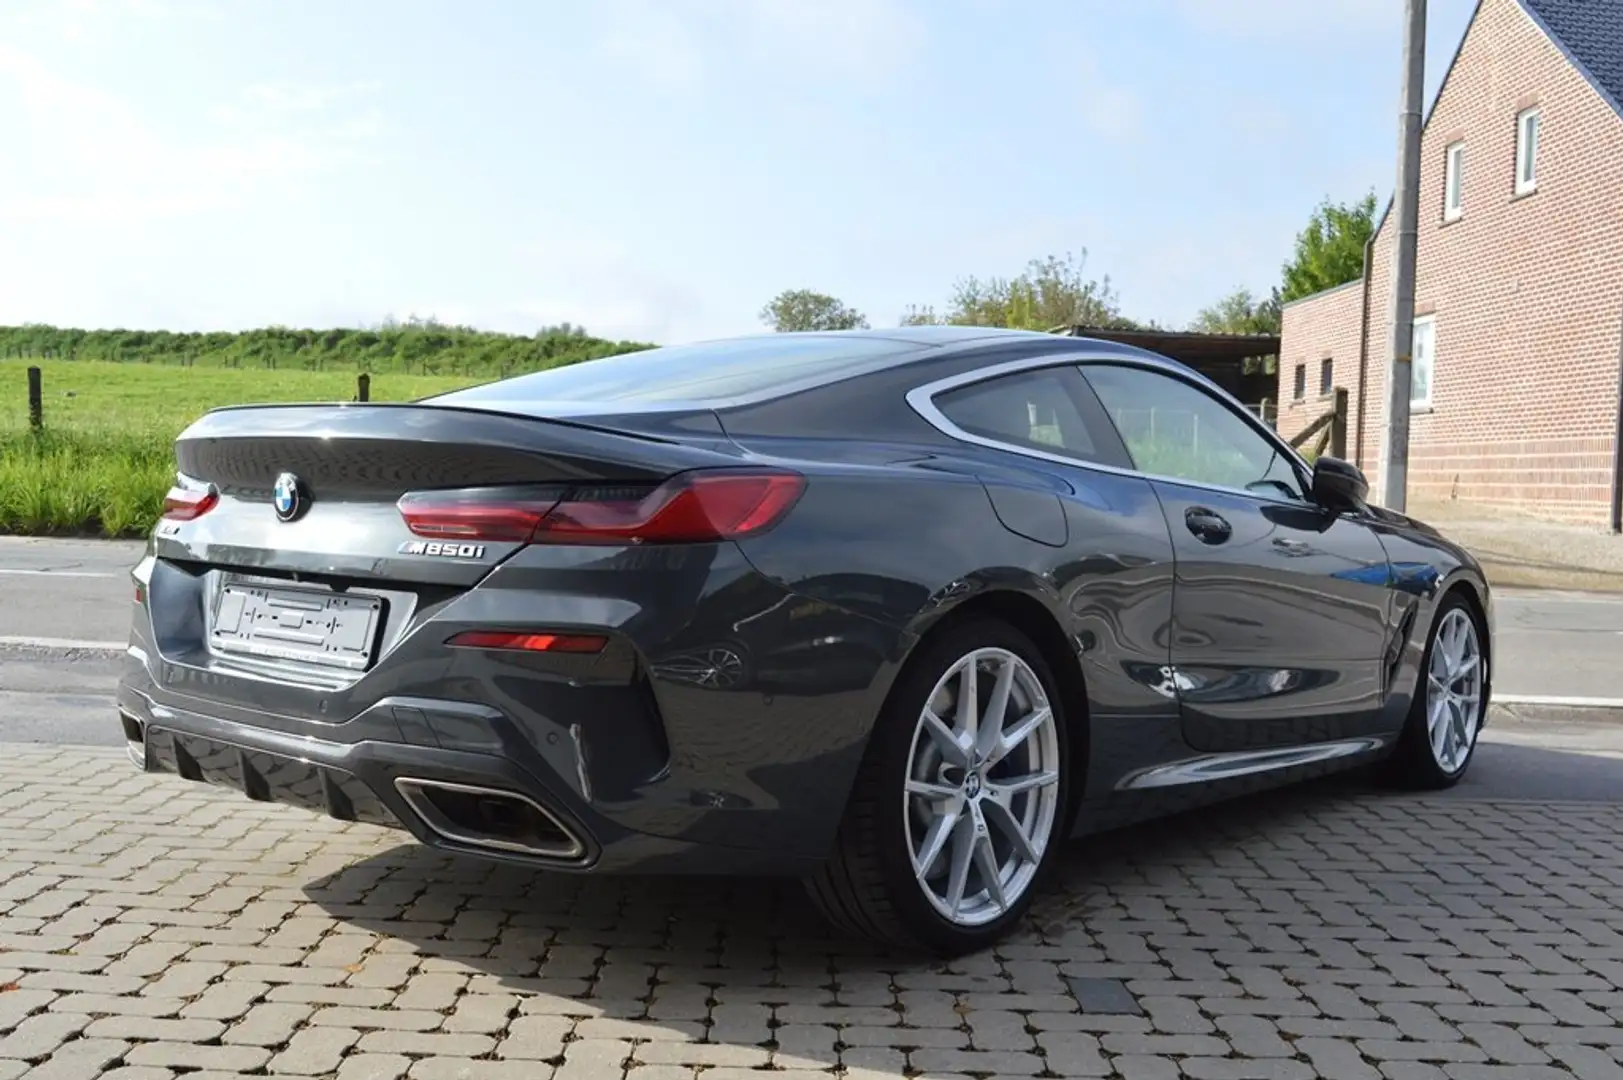 BMW 850 i xdrive 64.000 km ! Carbon pack ! Top condition ! Grey - 2